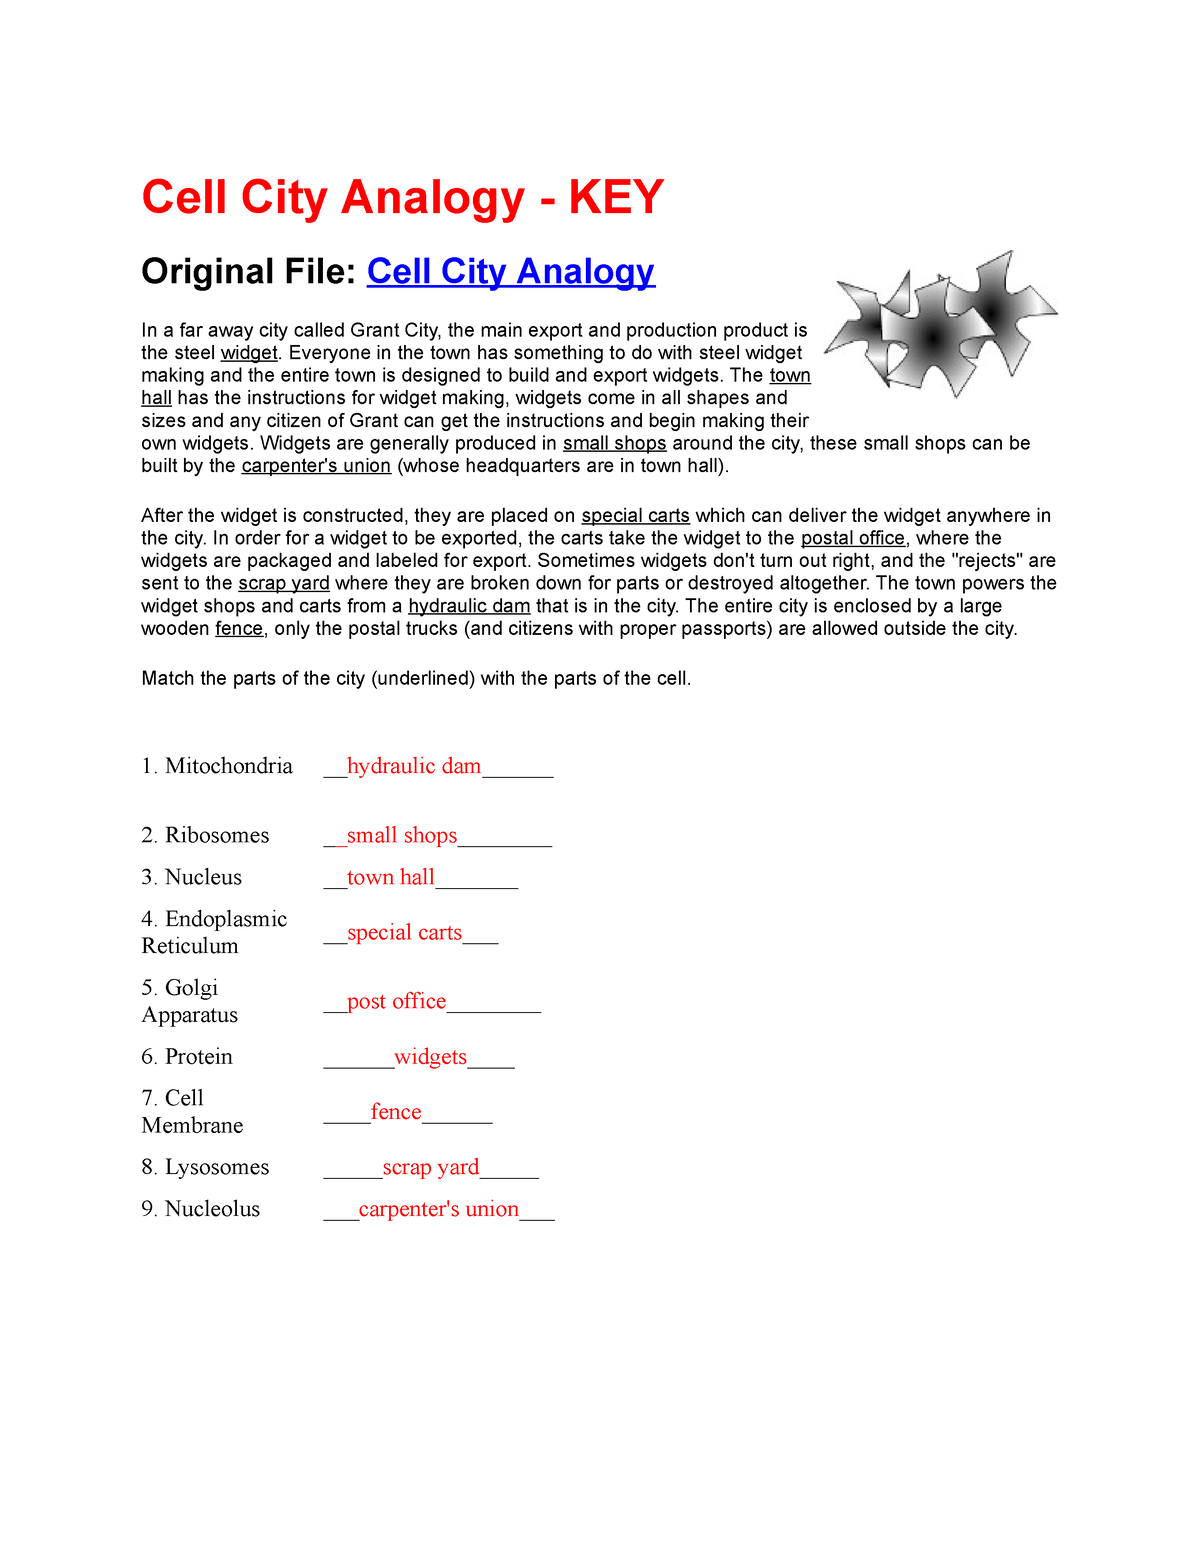 cell-city-analogy-key-cell-city-analogy-key-original-file-cell-city-analogy-in-a-far-away